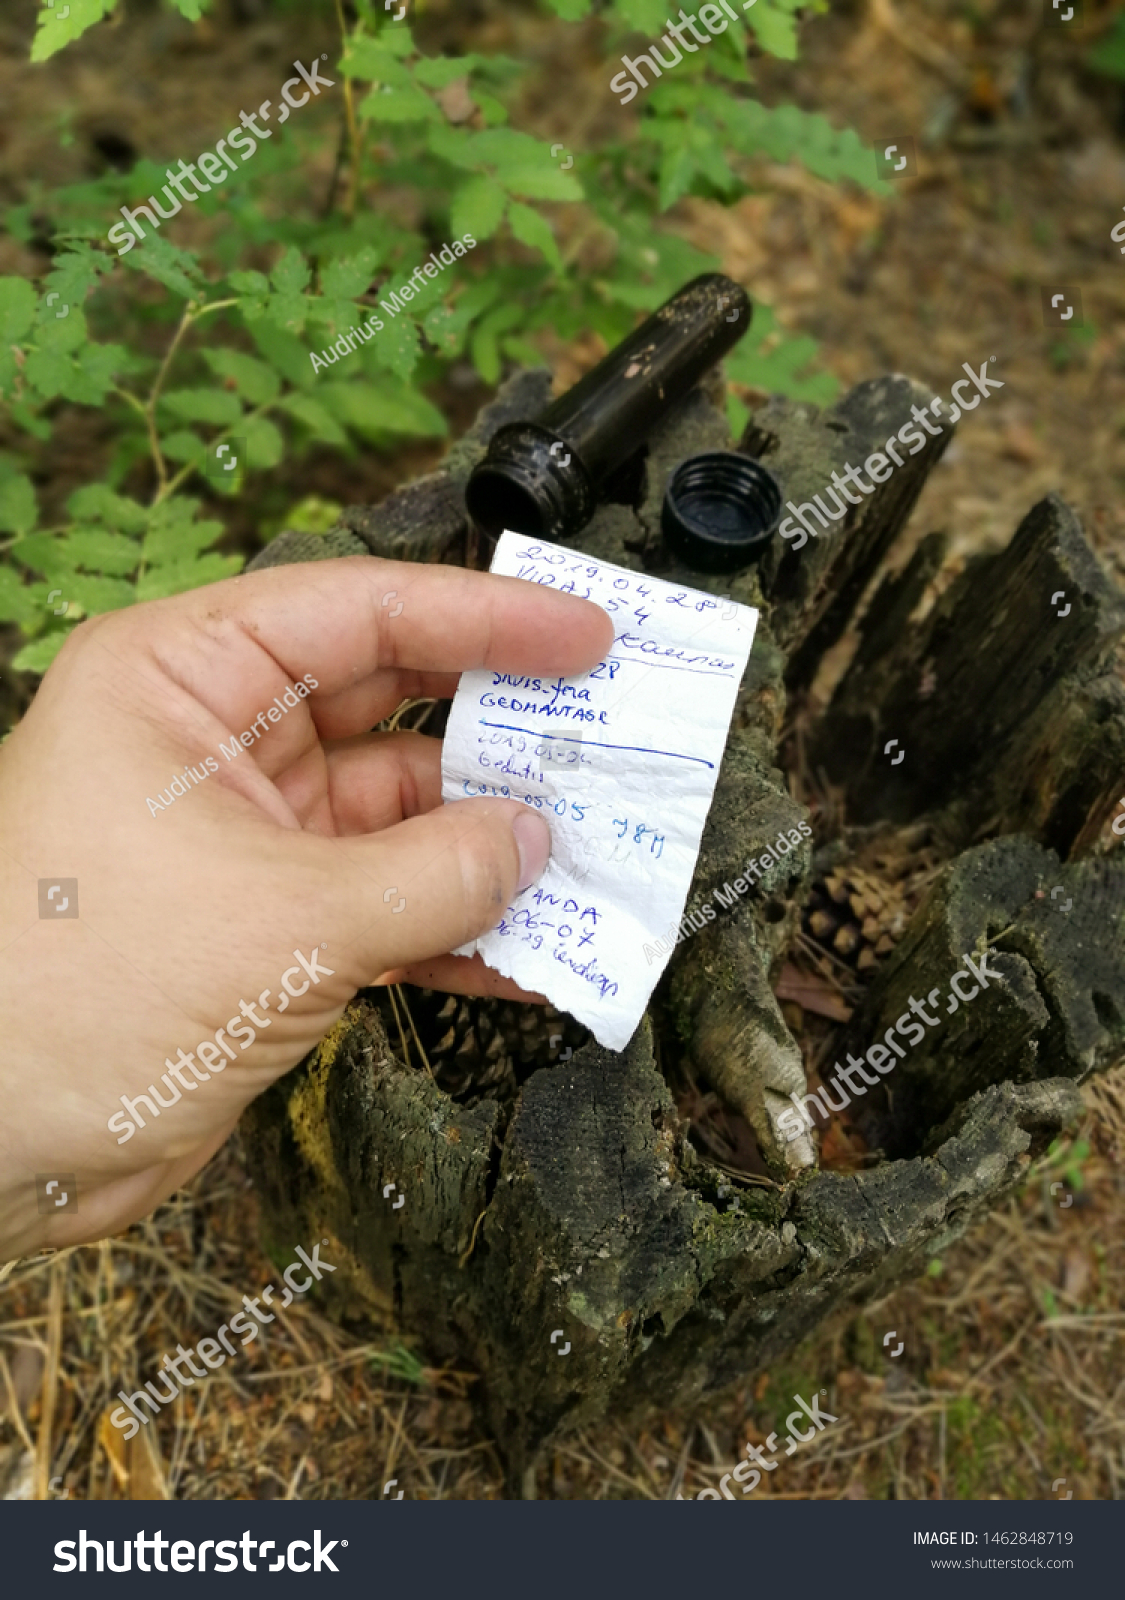 Geocaching activity treasure hunt game for searching symbolic treasures worldwide with gps #1462848719